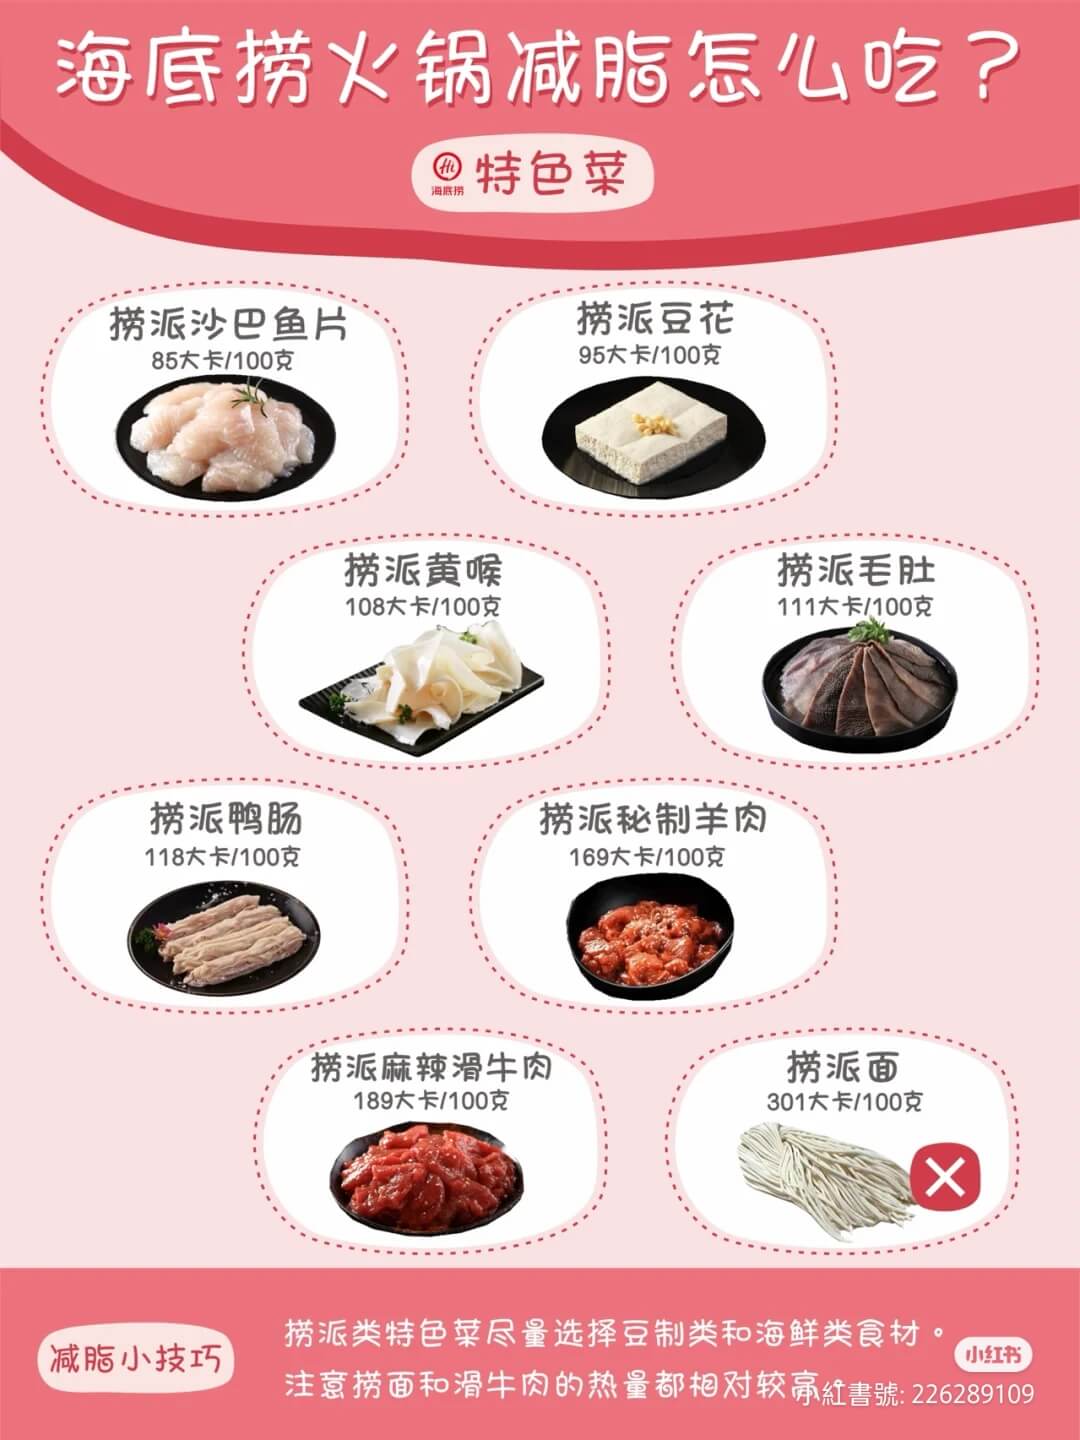 how-to-eat-haidilao-hotpot-without-guilt-special-menu